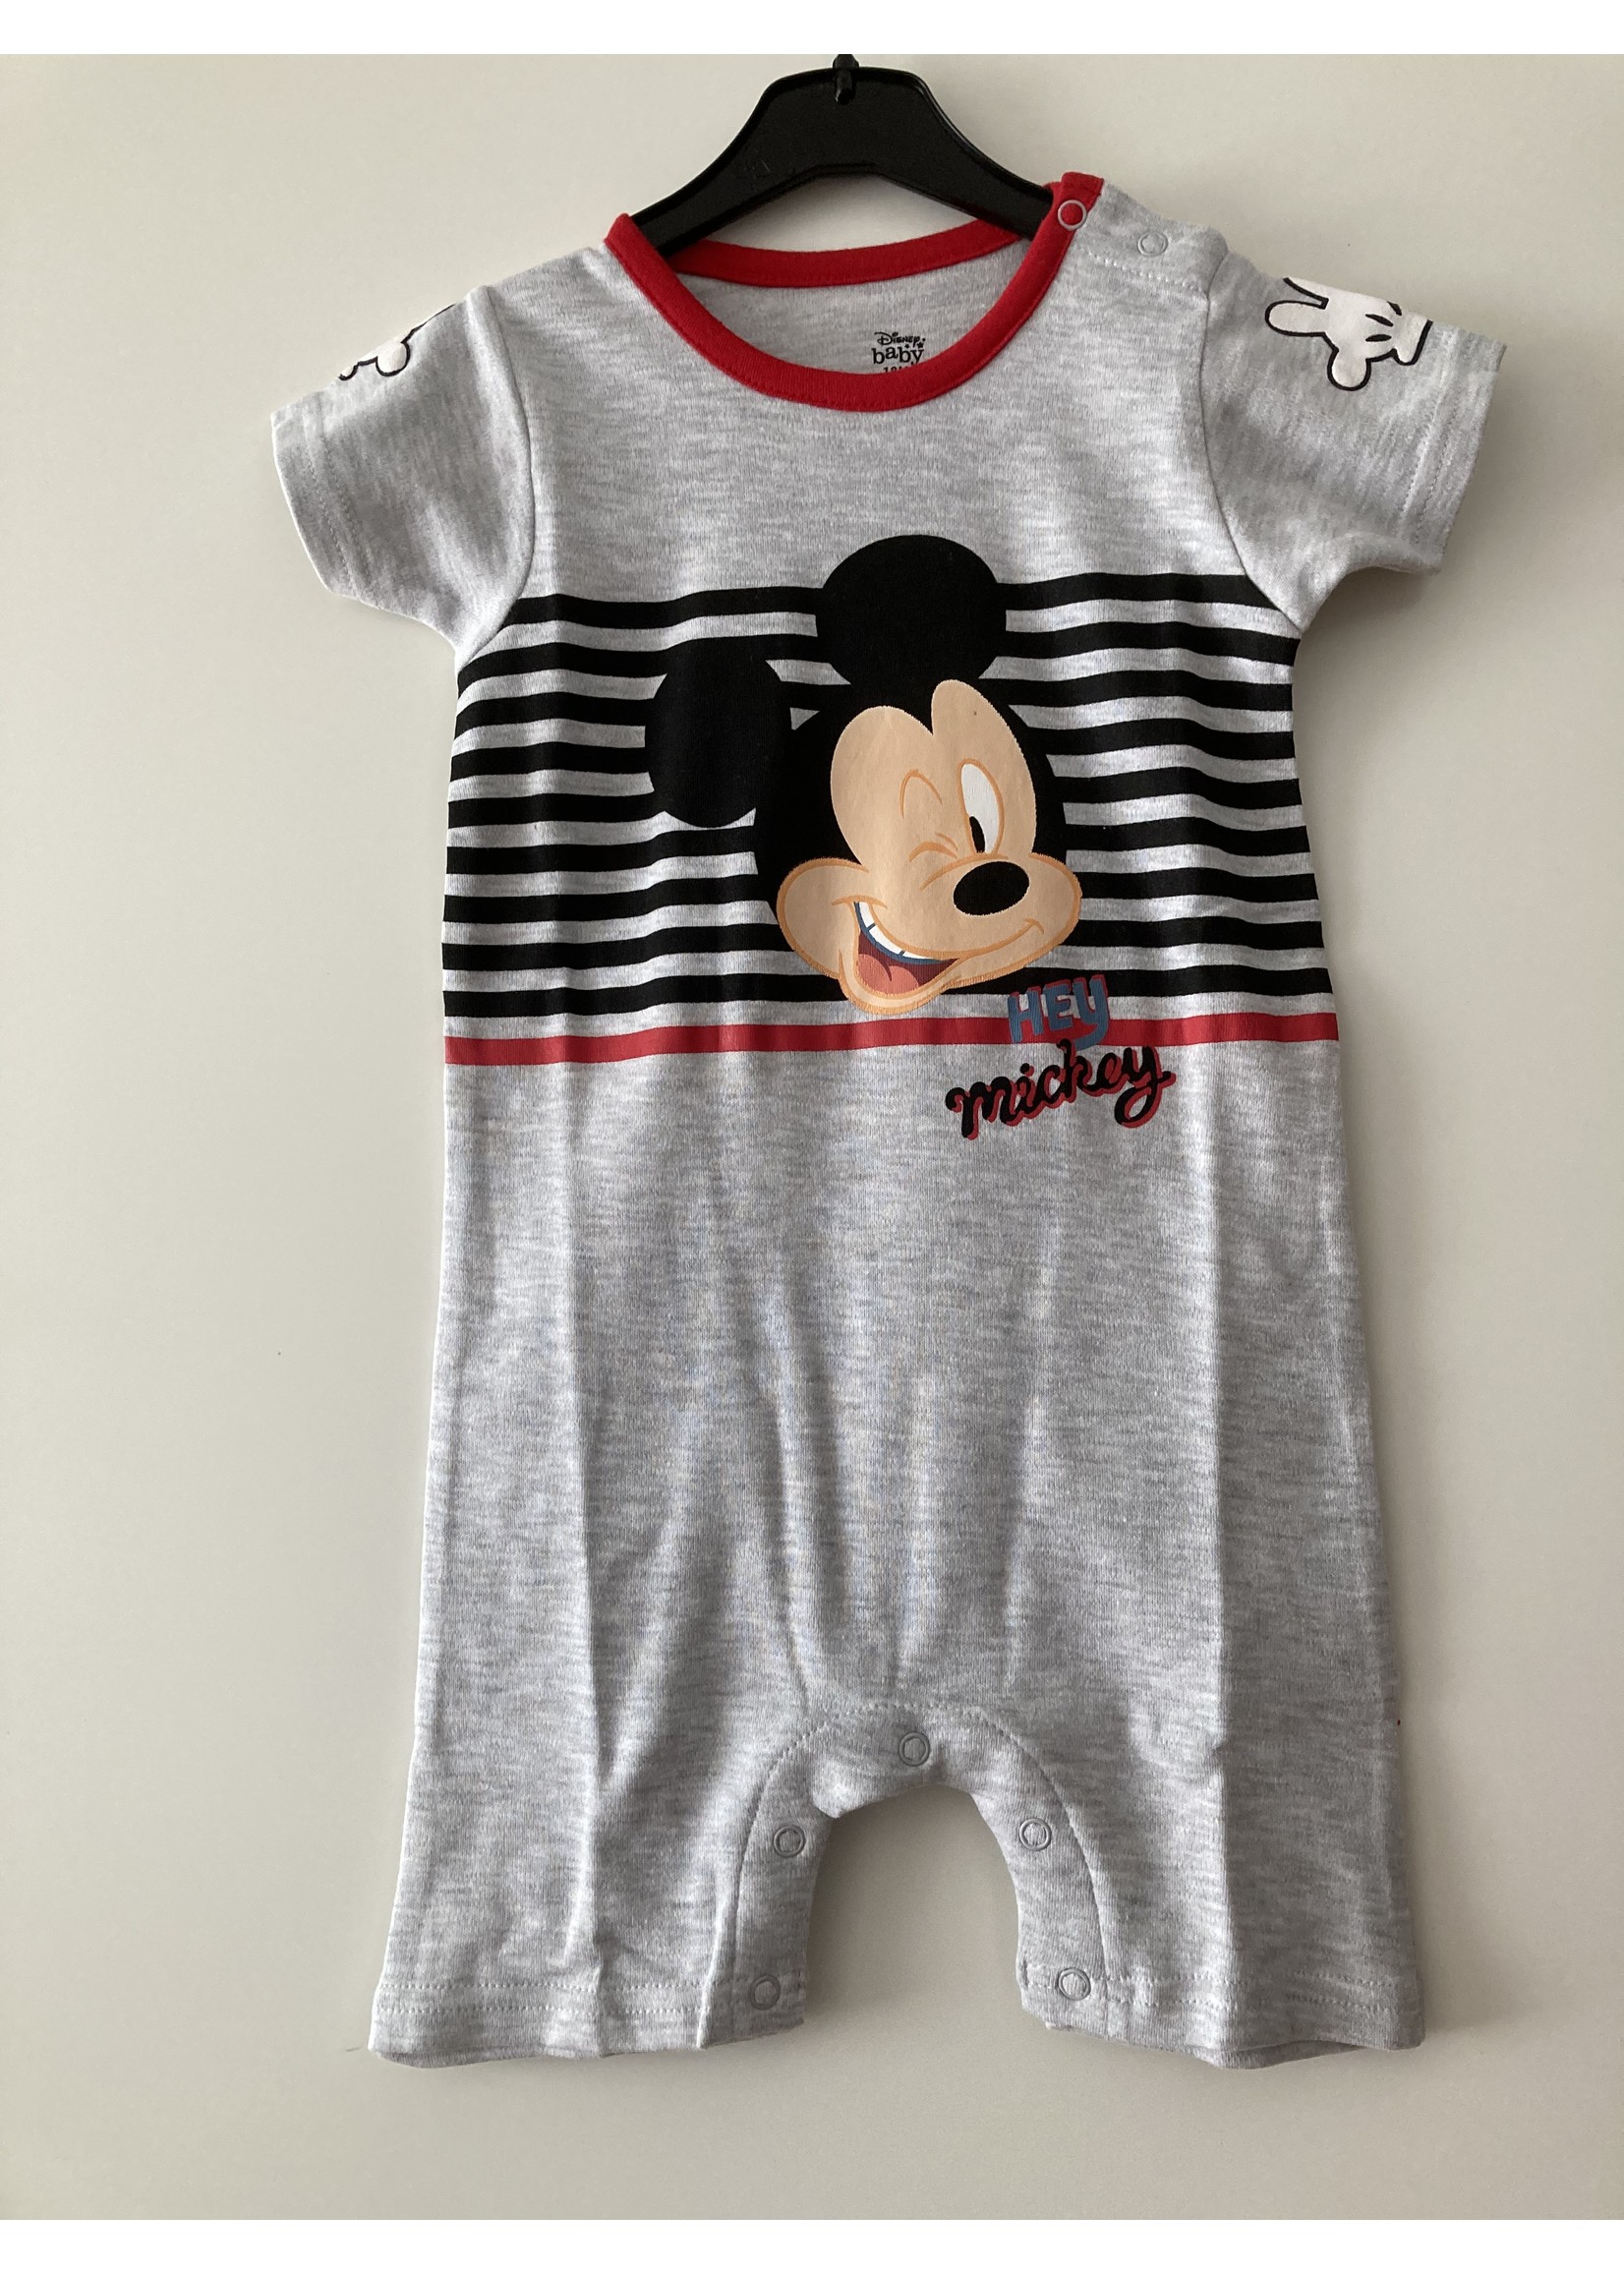 Disney baby Mickey Mouse romper from Disney baby gray